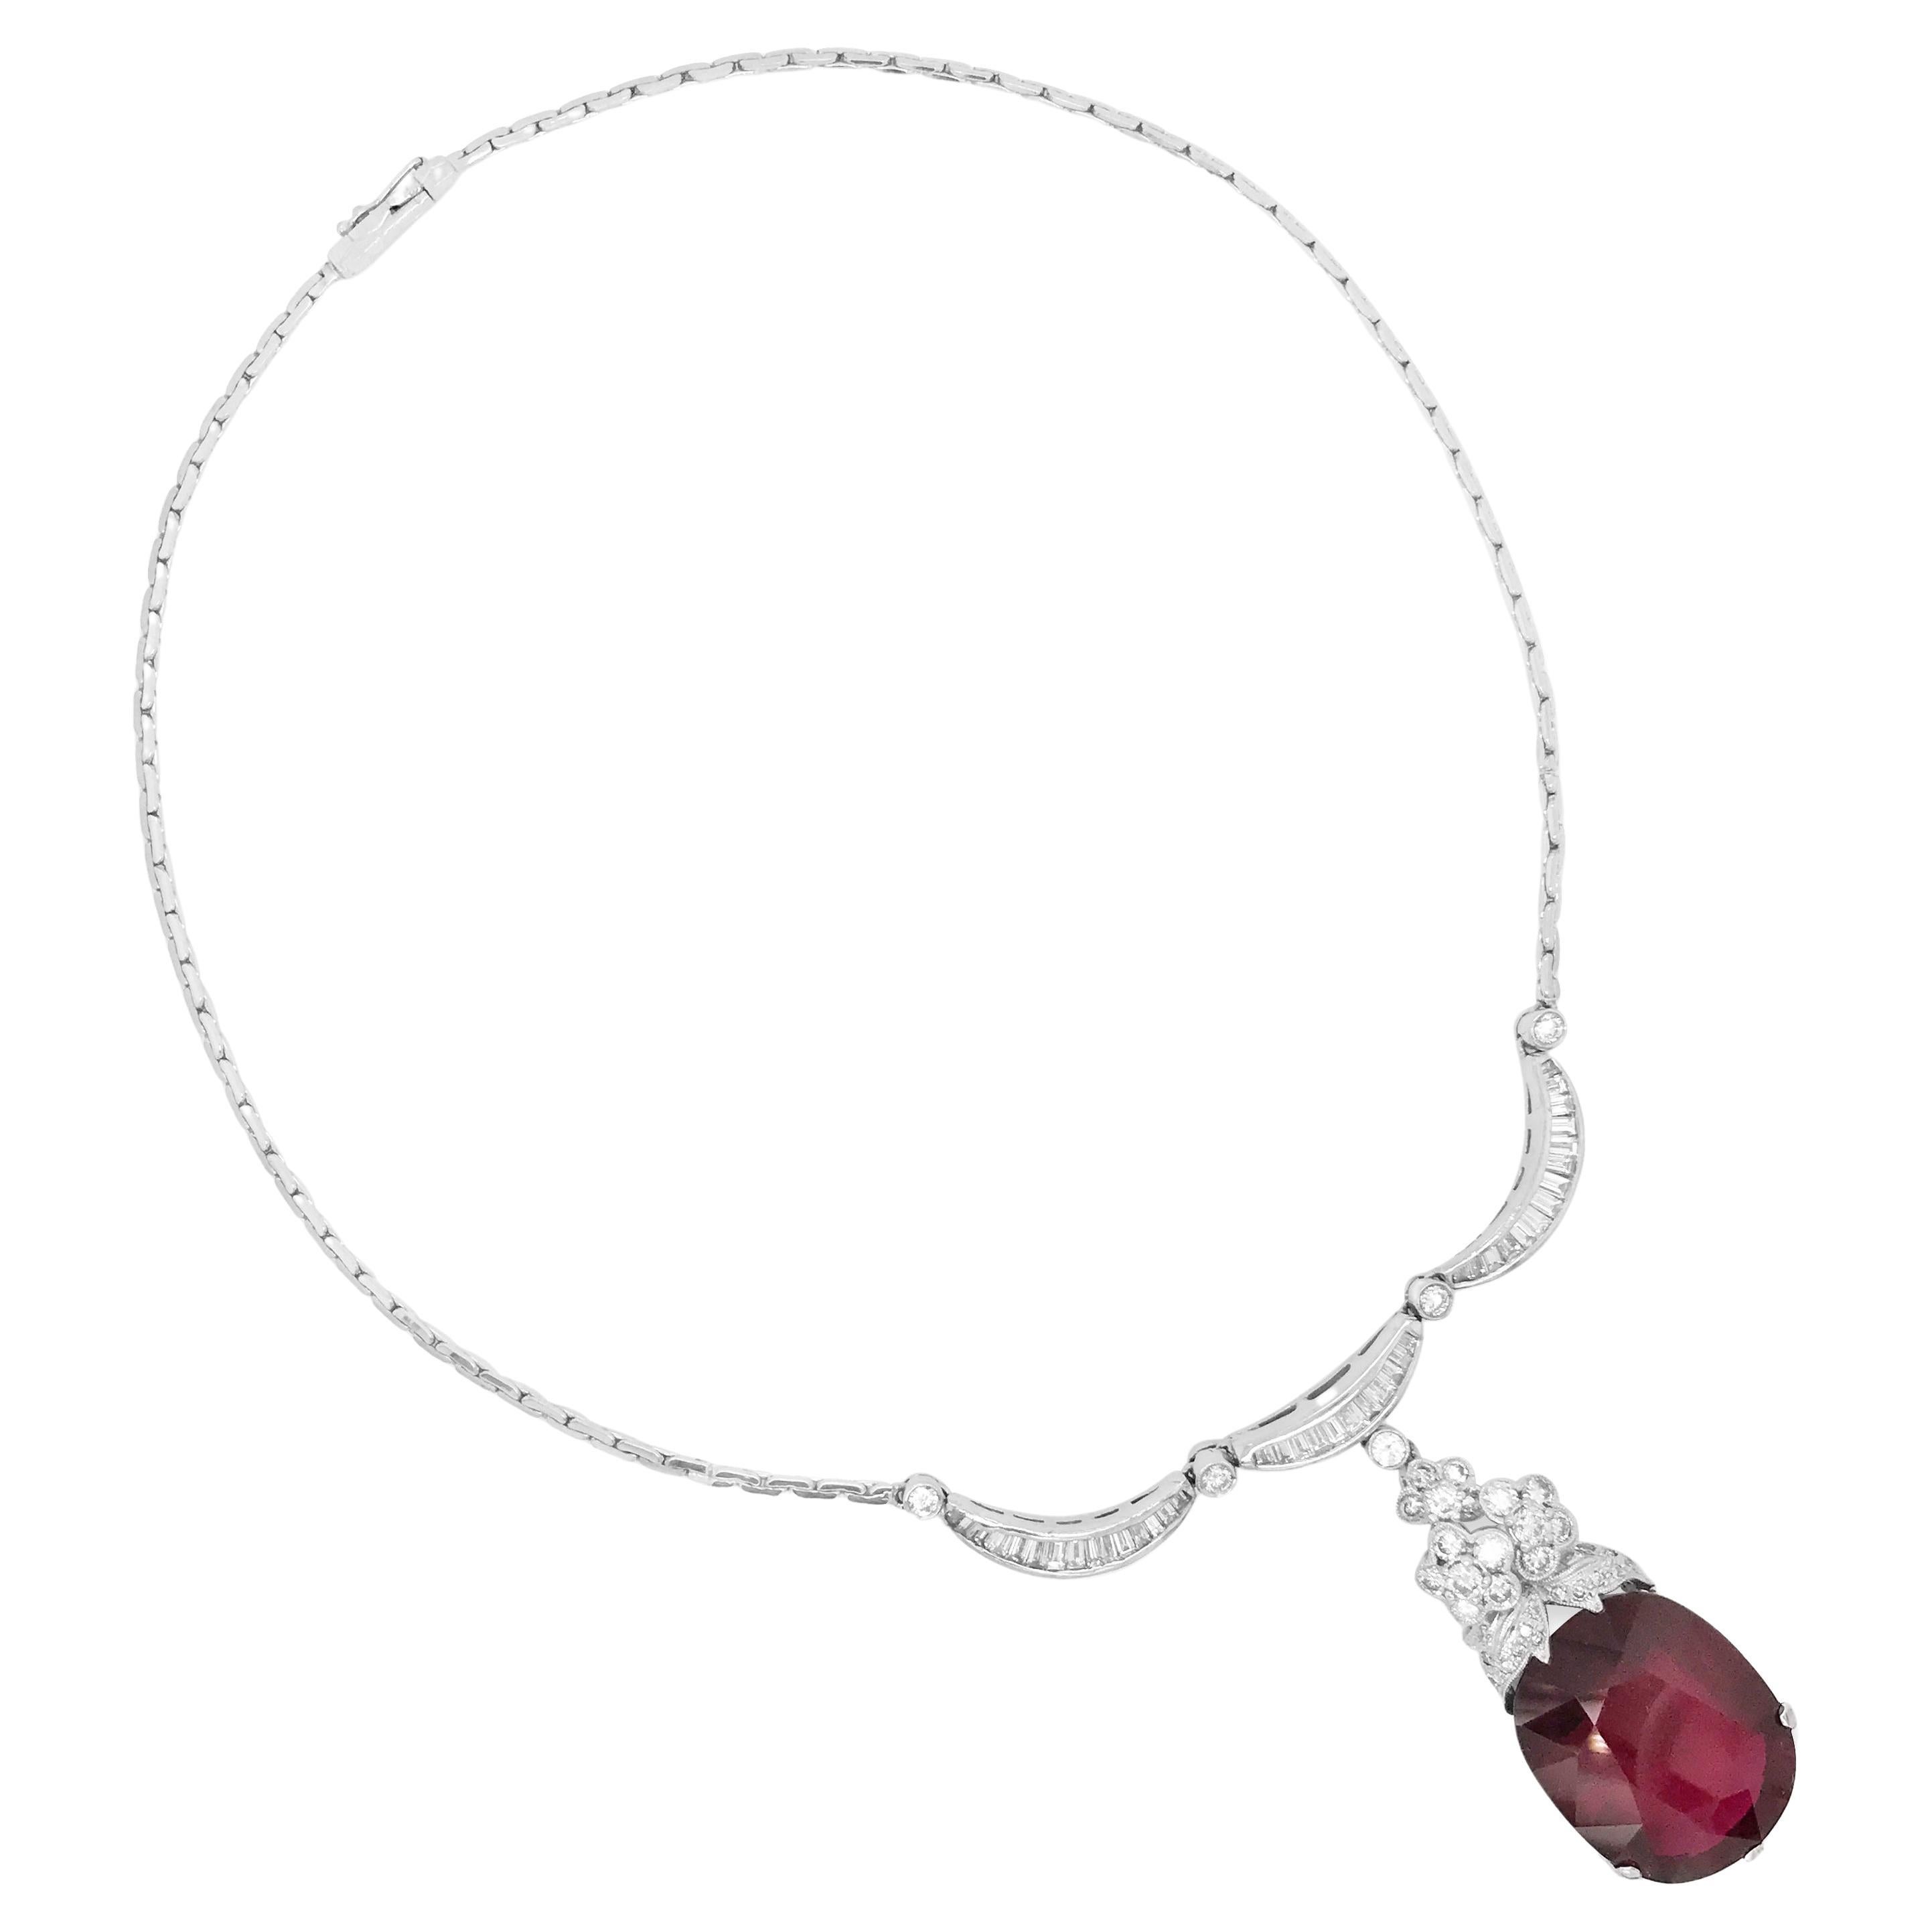 Diamond Necklace with Garnet Droplet